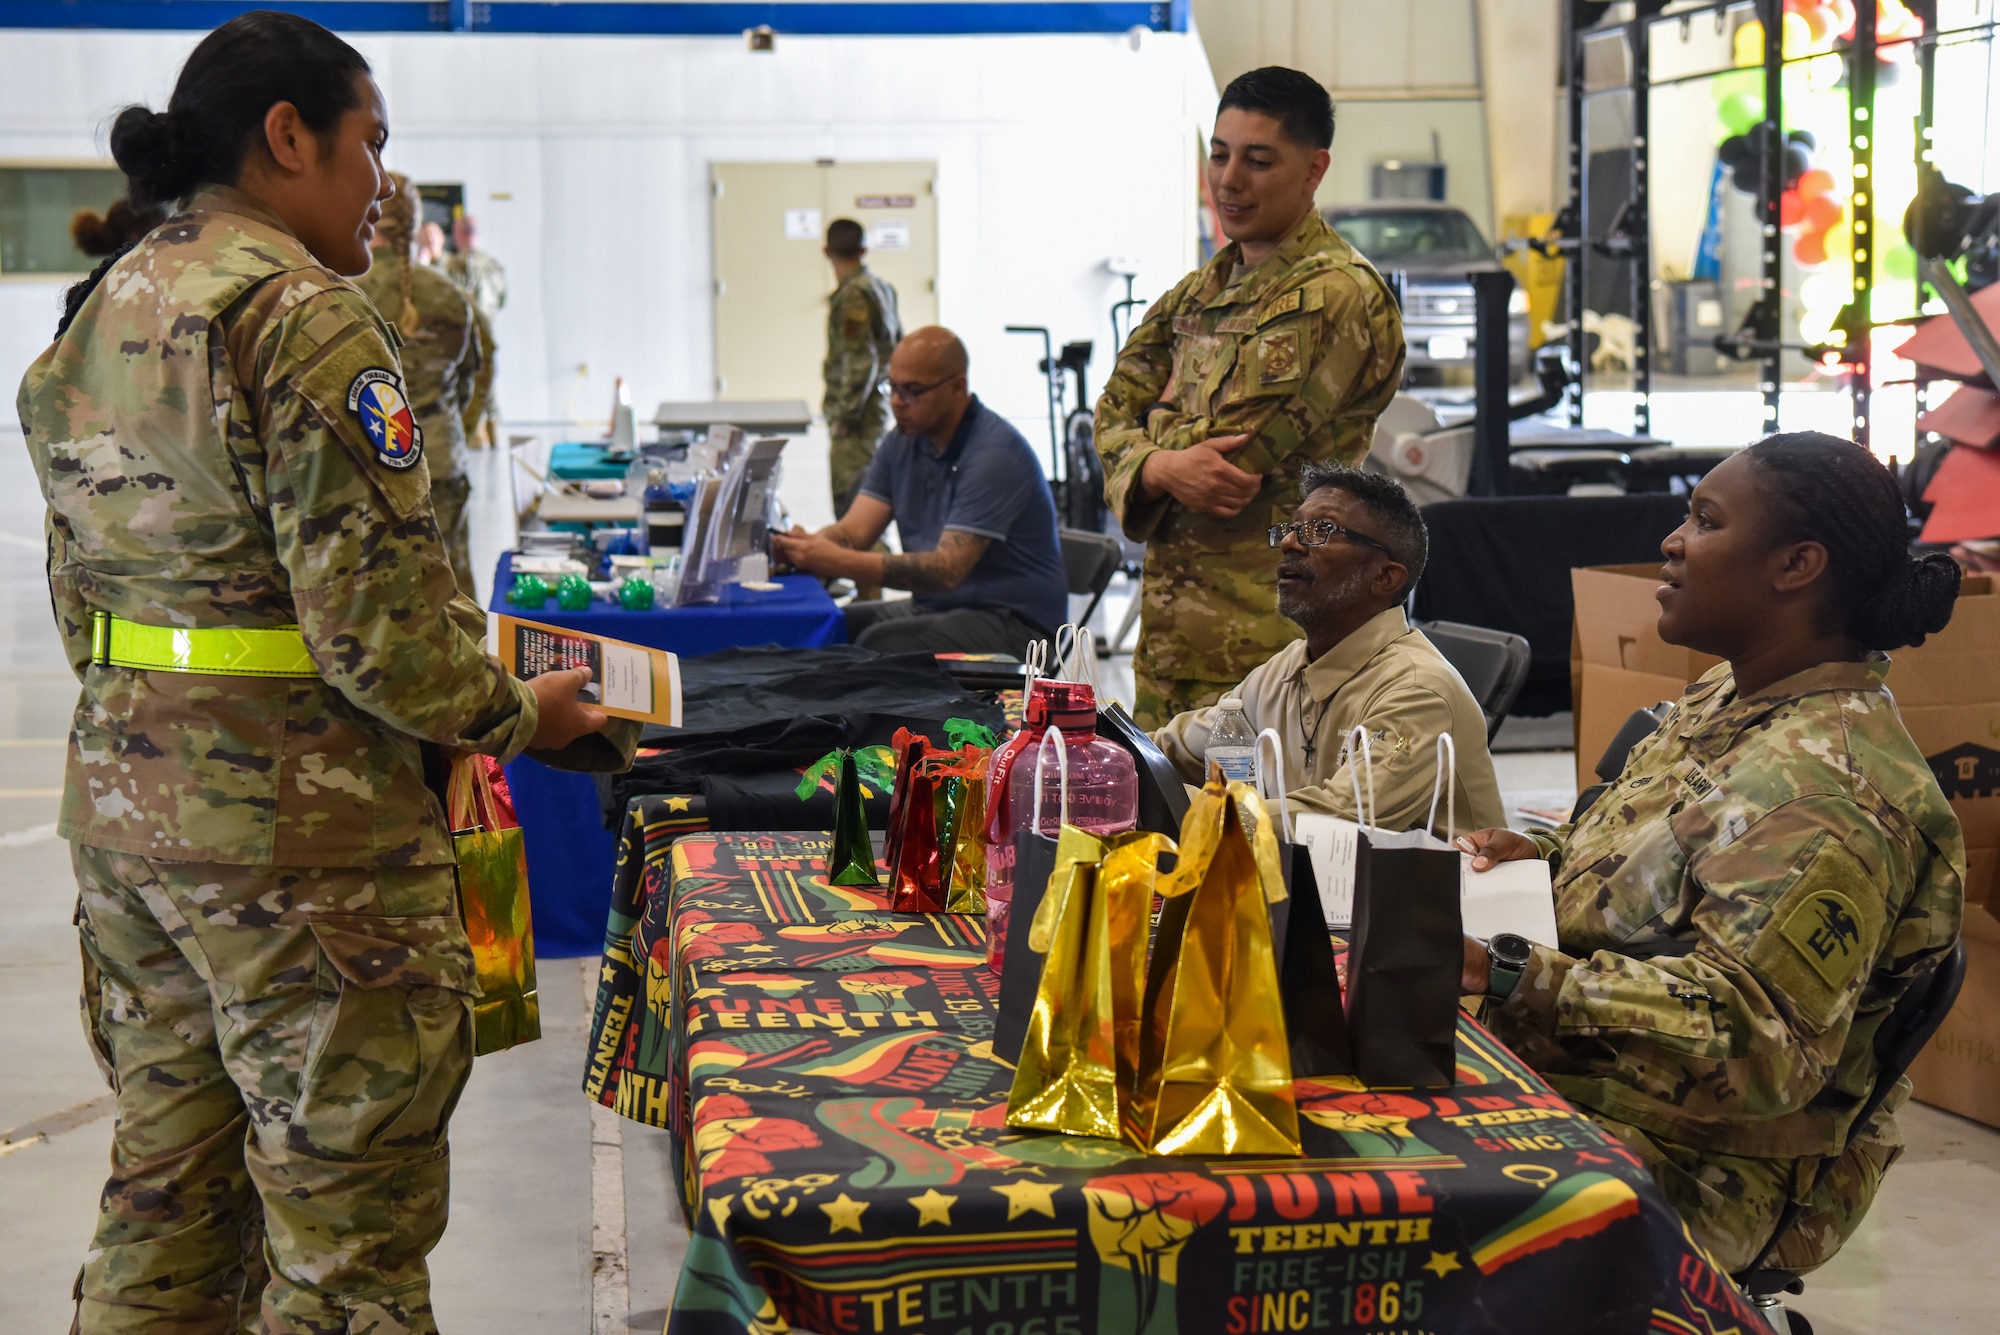 Goodfellow students engage in a Juneteenth trivia game during the Juneteenth commemoration ceremony at Goodfellow Air Force Base, Texas, June 16, 2022. Members were awarded prizes for correct answers. (U.S. Air Force photo by Staff Sgt. Jermaine Ayers)